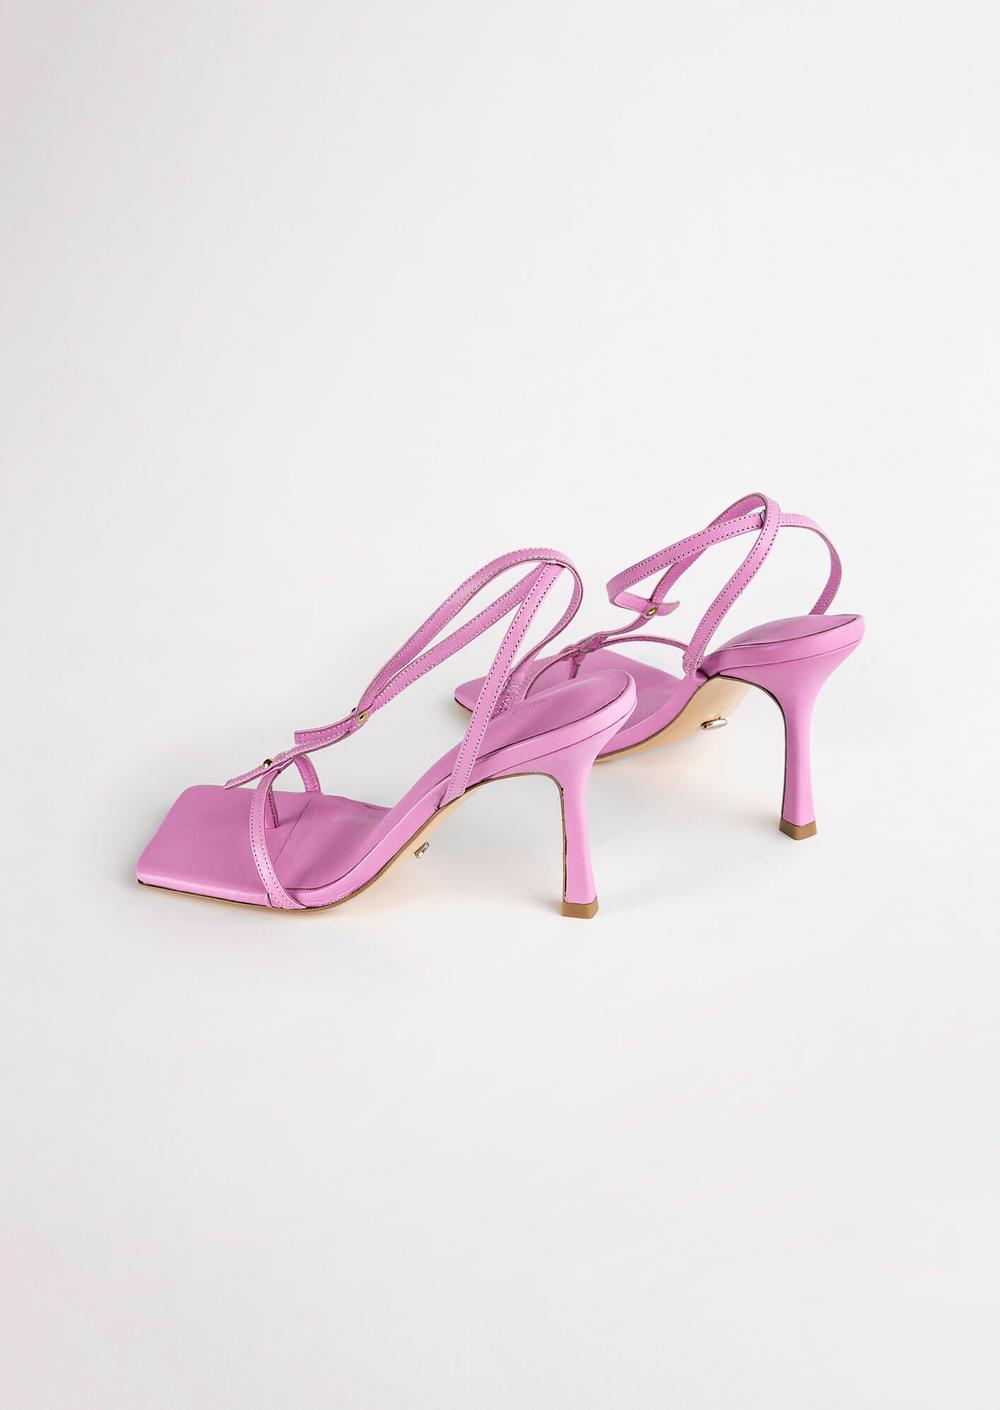 LILLY STRAPPY HEEL - TONY BIANCO - 10, 5, 6, 6.5, 7, 7.5, 8, 8.5, 9, 9.5, lilac, musk, on sale, stiletto, stiletto heel, STRAPPY HEEL, womens footwear - Stomp Shoes Darwin